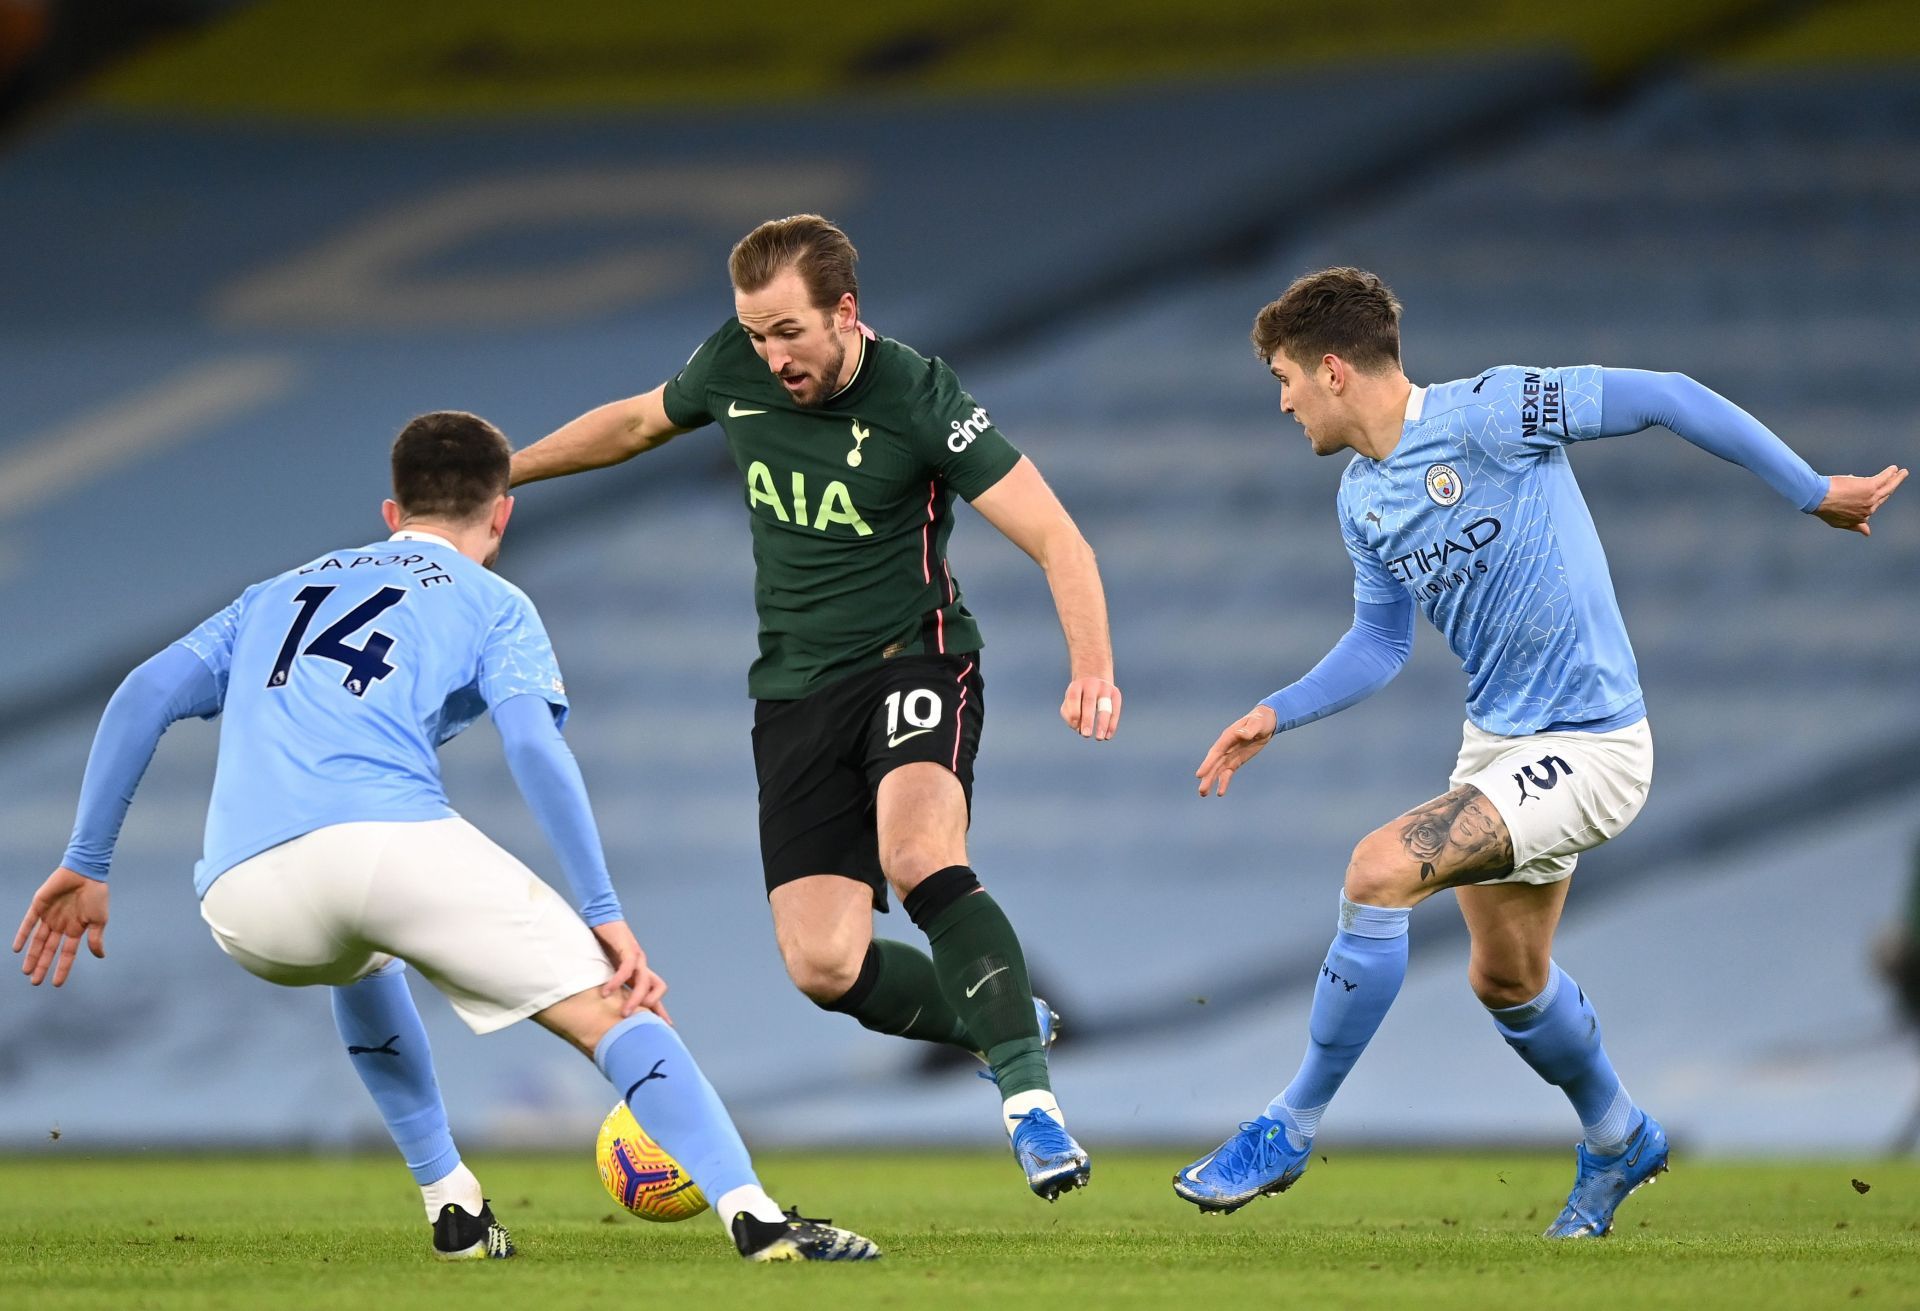 Manchester City take on Tottenham Hotspur this weekend